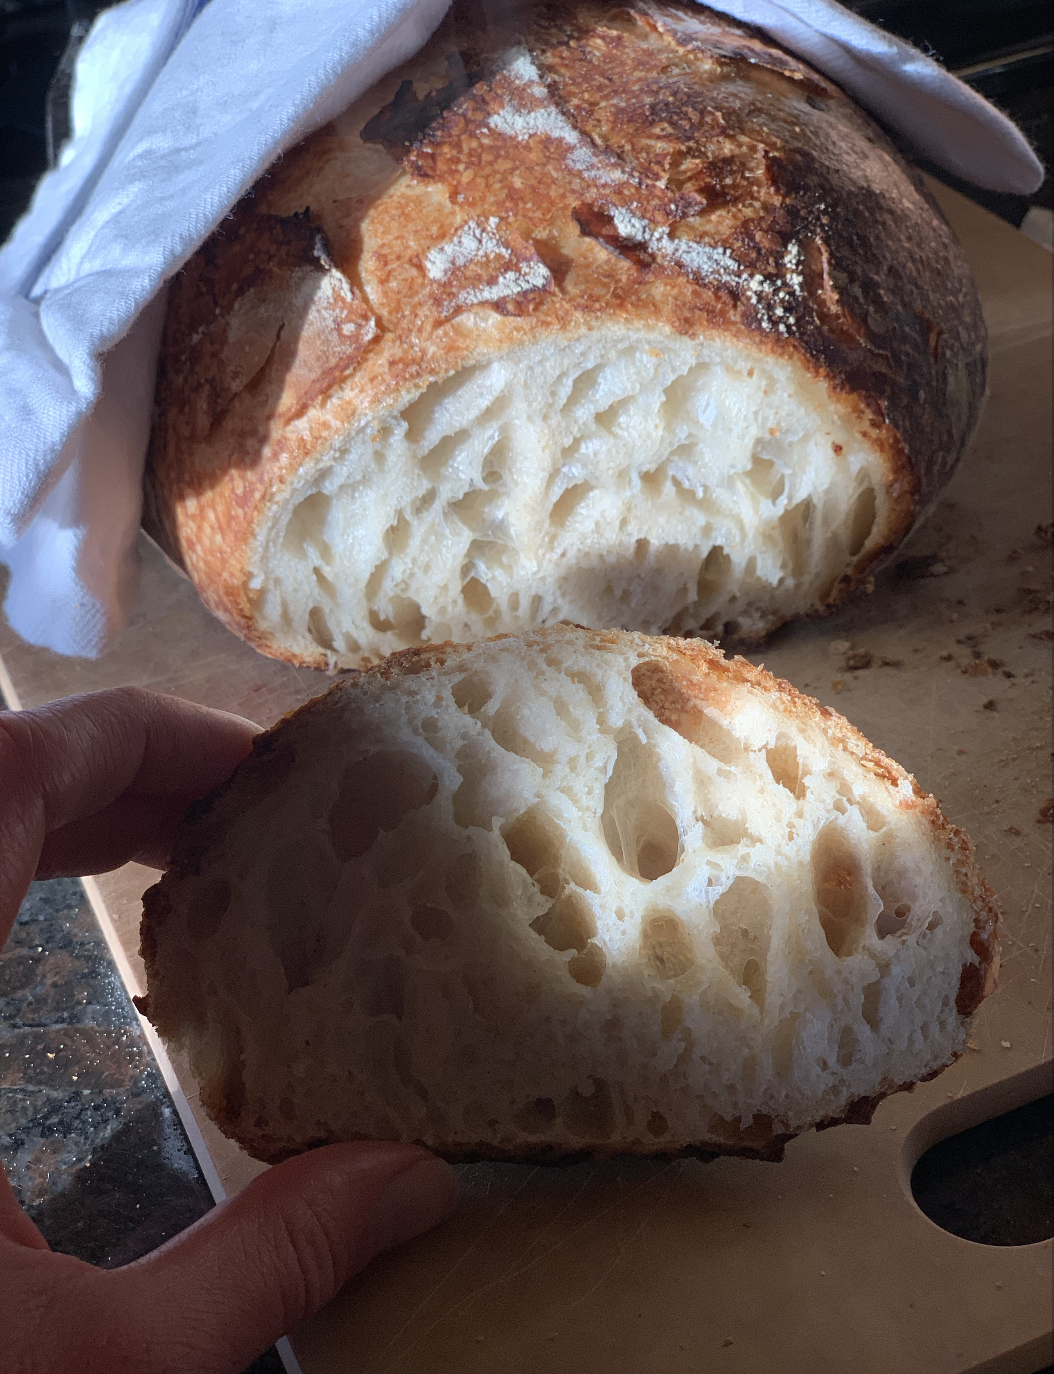 Honed my sourdough routine and got some enviable air bubbles going on.